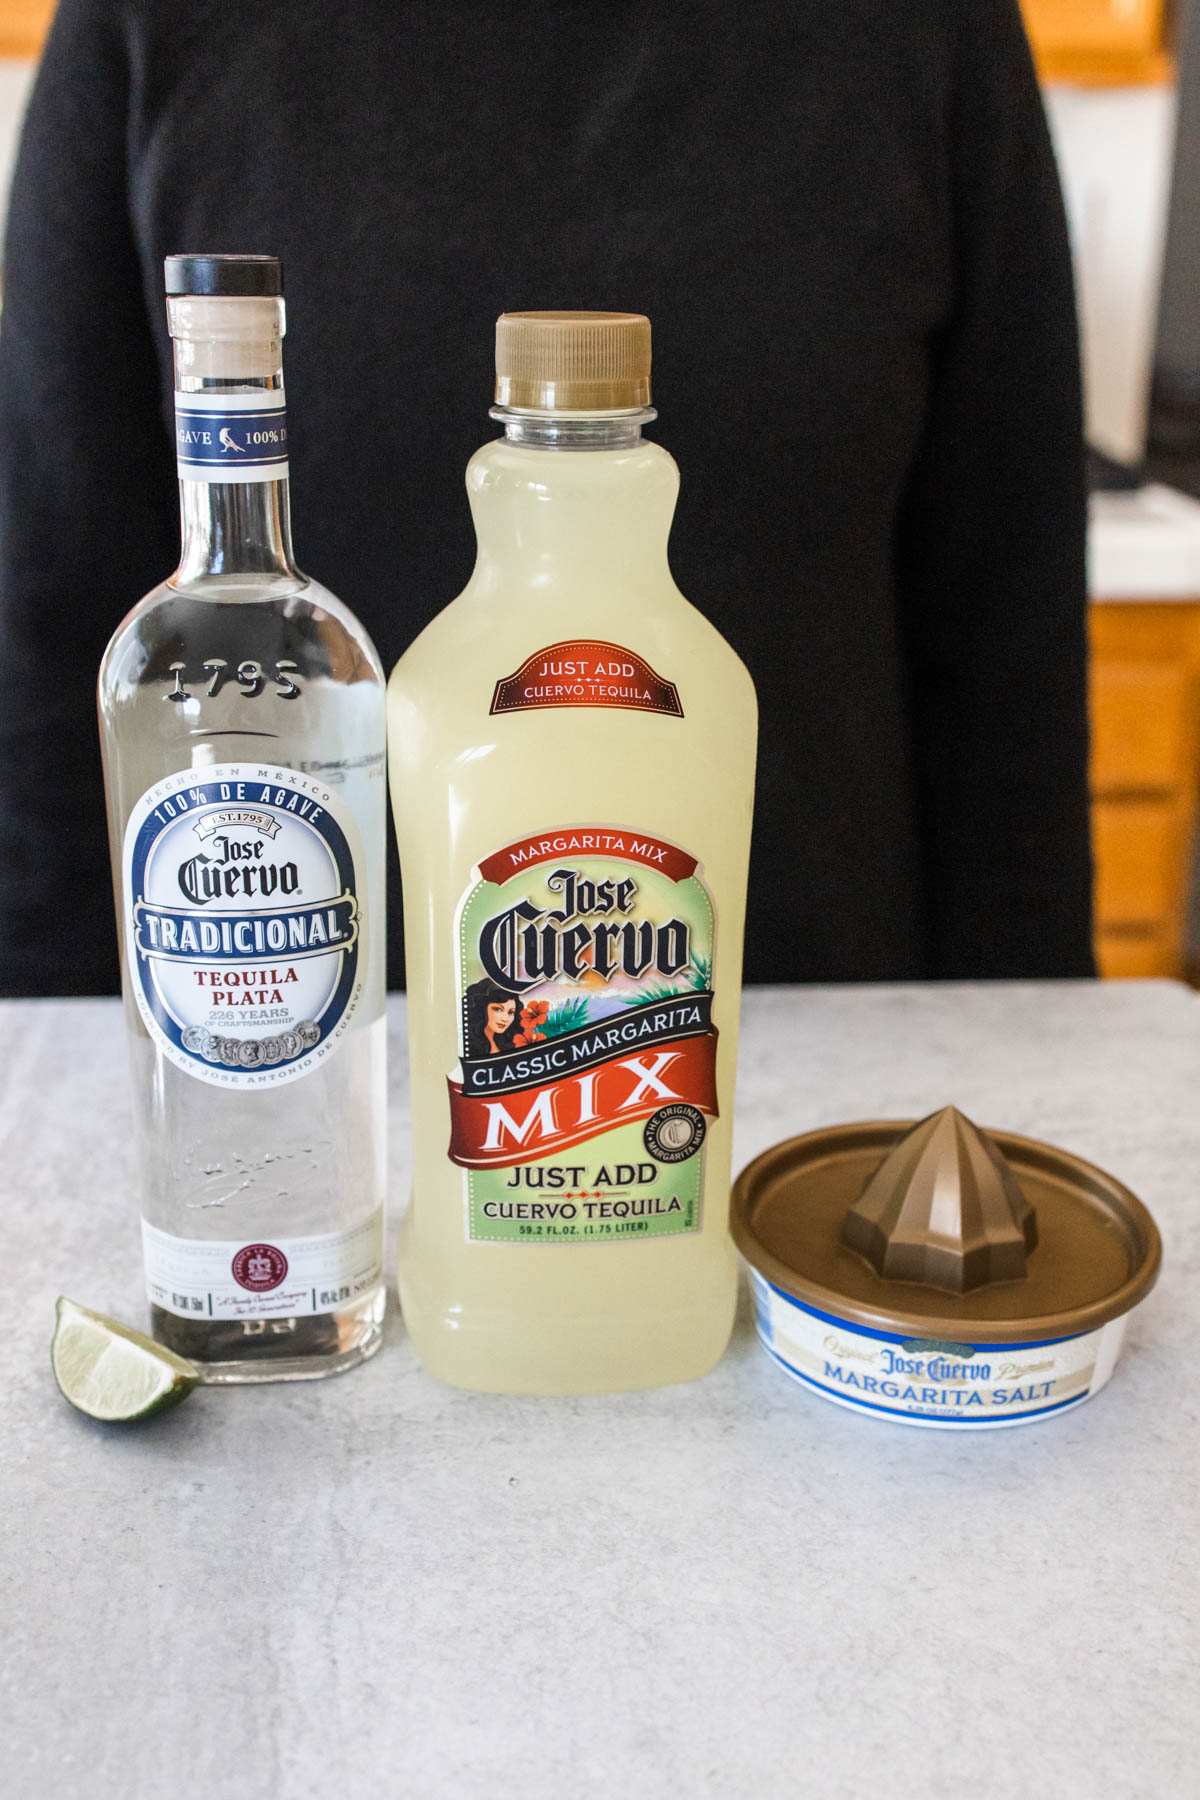 Jose Cuervo Tradicional tequila with Jose Cuervo margarita mix, a fresh slice of lime and margarita salt on a counter.